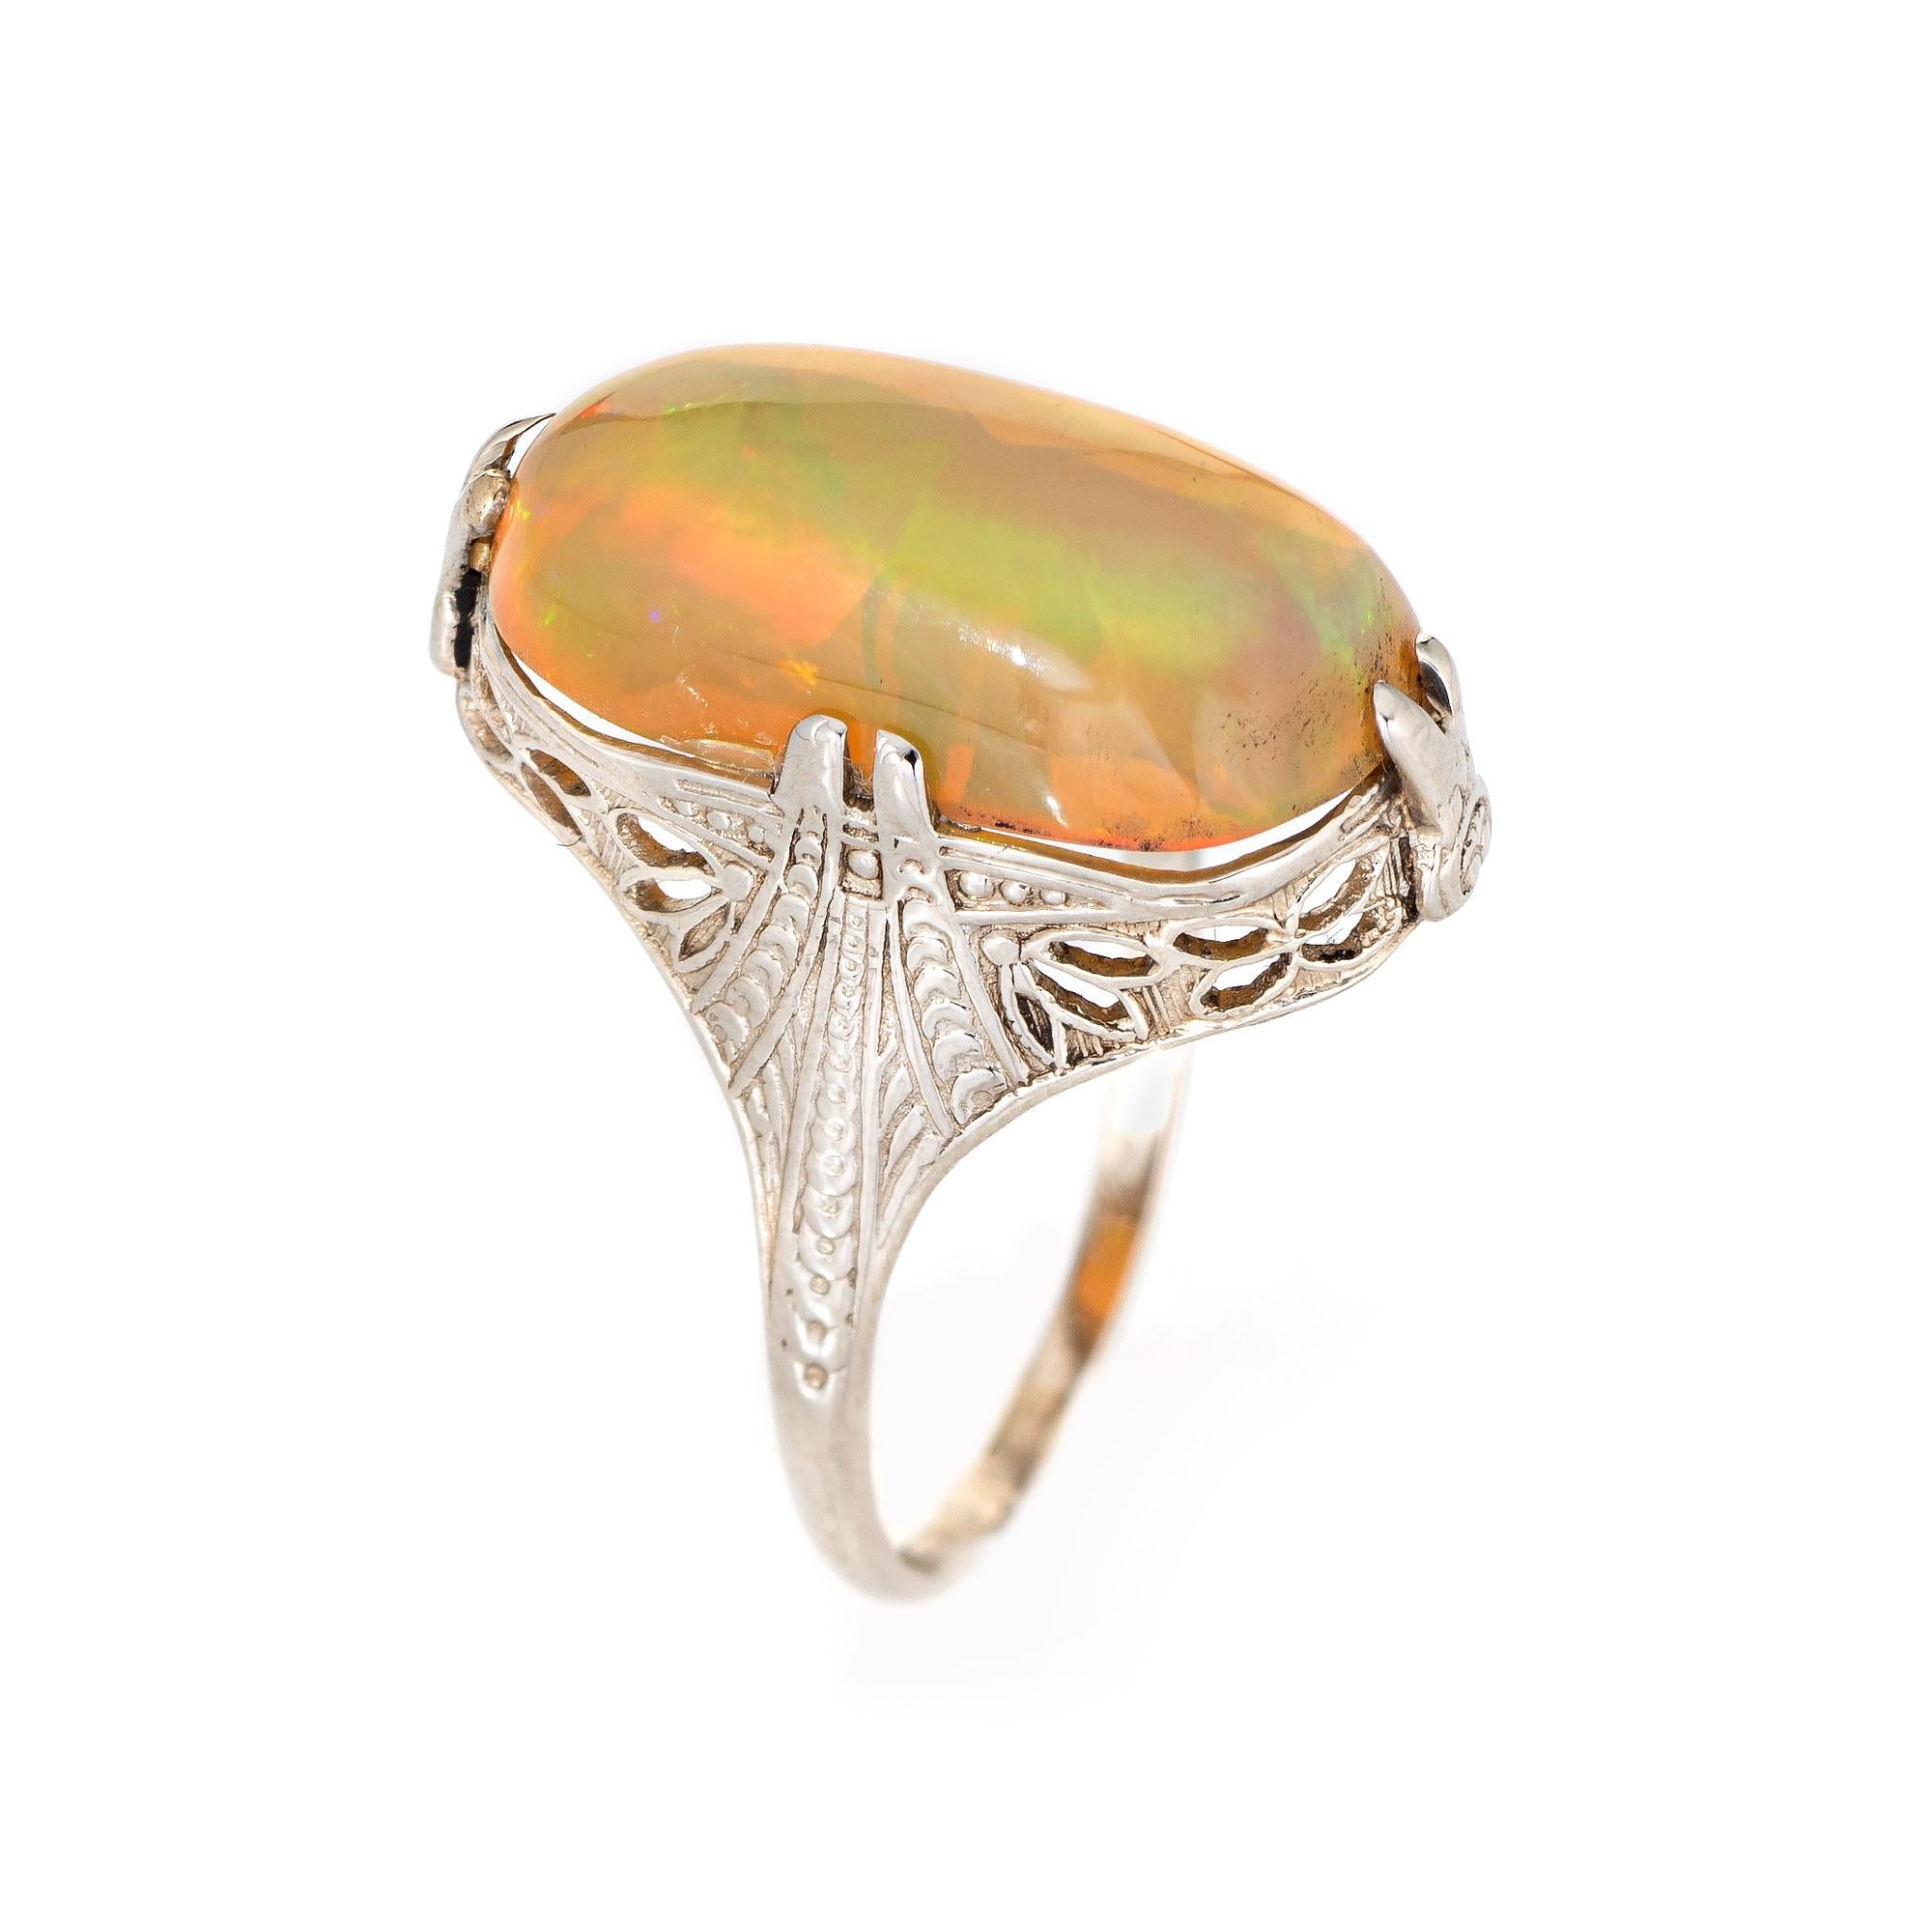 Elegant & finely detailed Belais Art Deco era ring (circa 1920s to 1930s) crafted in 14k white gold. 

Cabochon cut Ethiopian opal measures 15mm x 8.5mm (estimated at 4.50 carats). The opal is in very good condition and free of cracks or